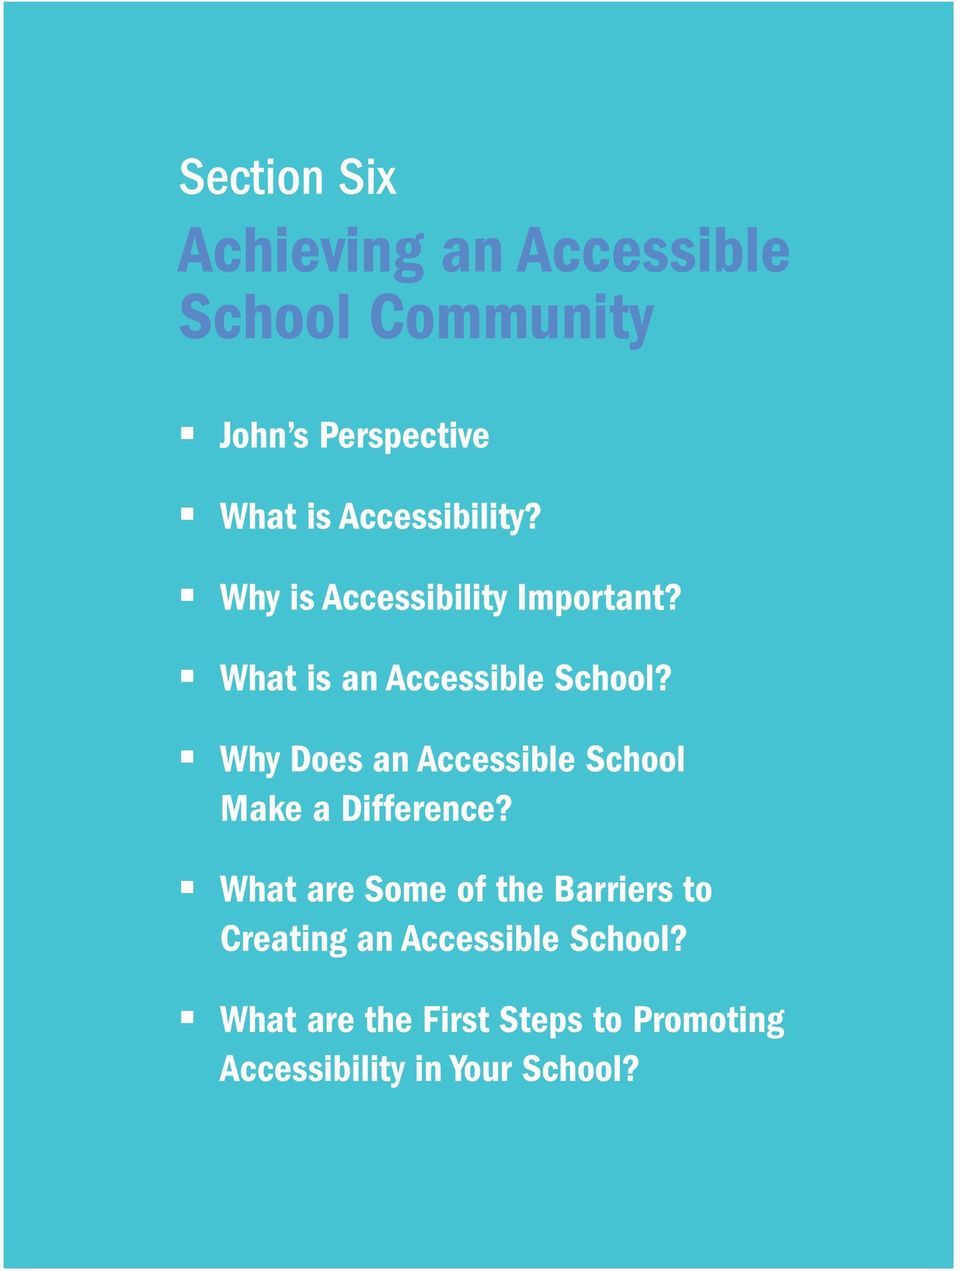 Why Does an Accessible School Make a Difference?